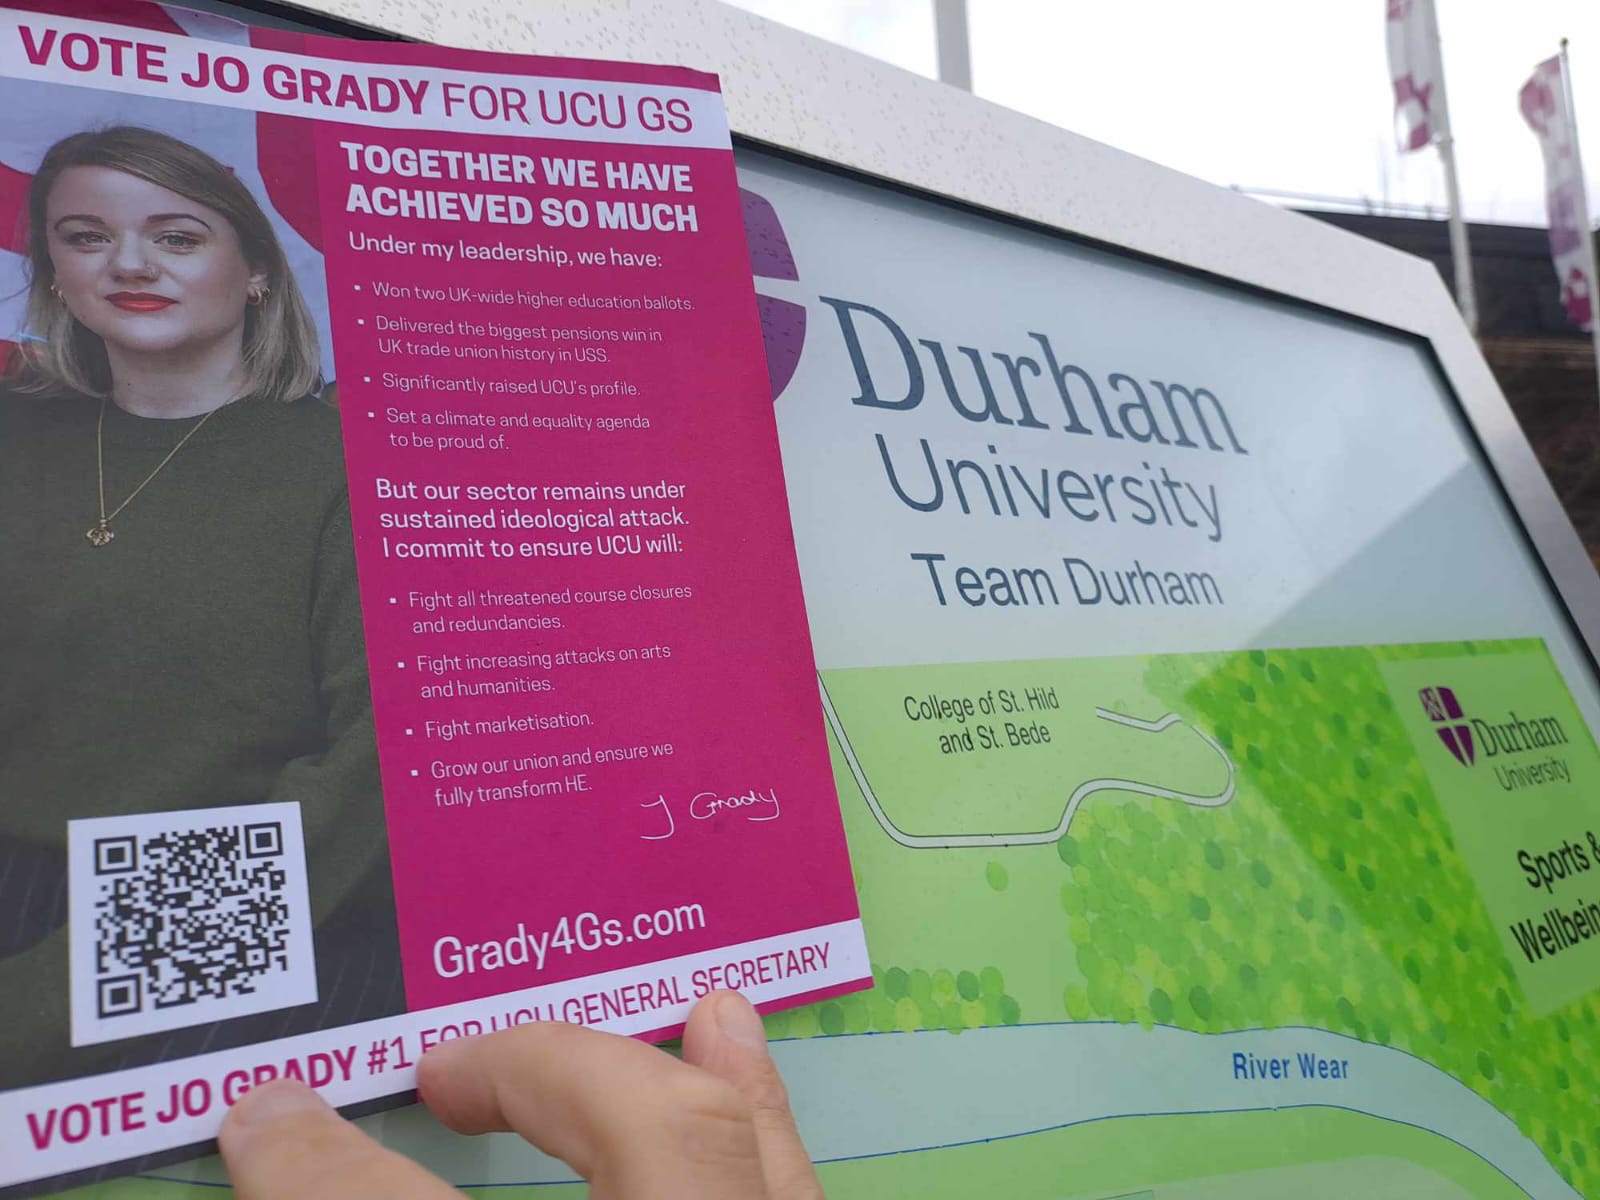 Grady4GS leaflet being held up next to a large map of Durham University